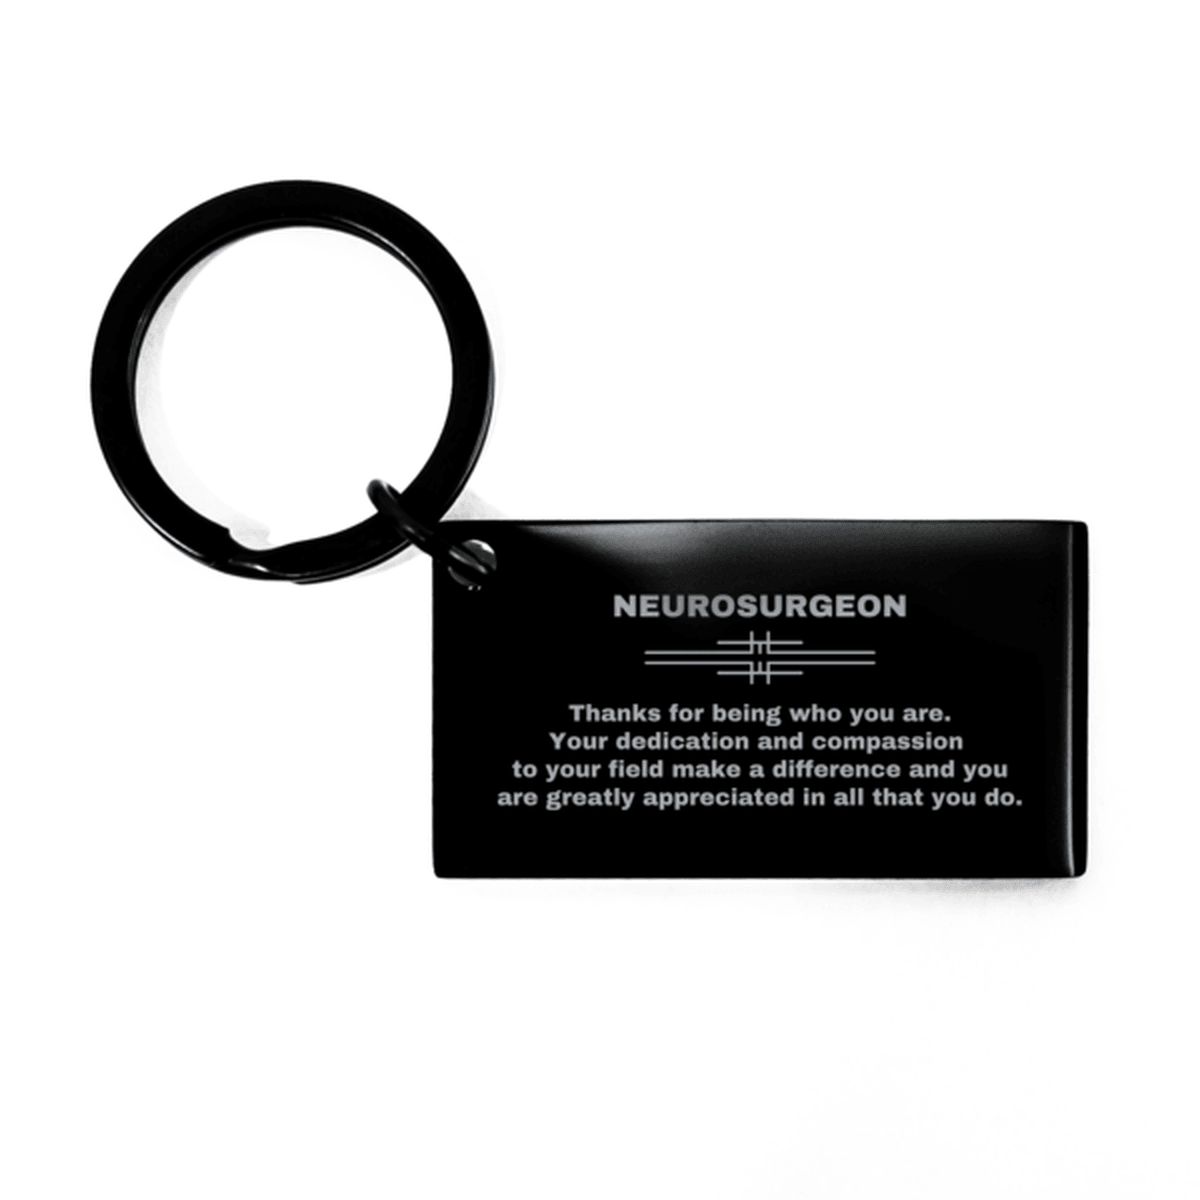 Neurosurgeon Black Engraved Keychain - Thanks for being who you are - Birthday Christmas Jewelry Gifts Coworkers Colleague Boss - Mallard Moon Gift Shop